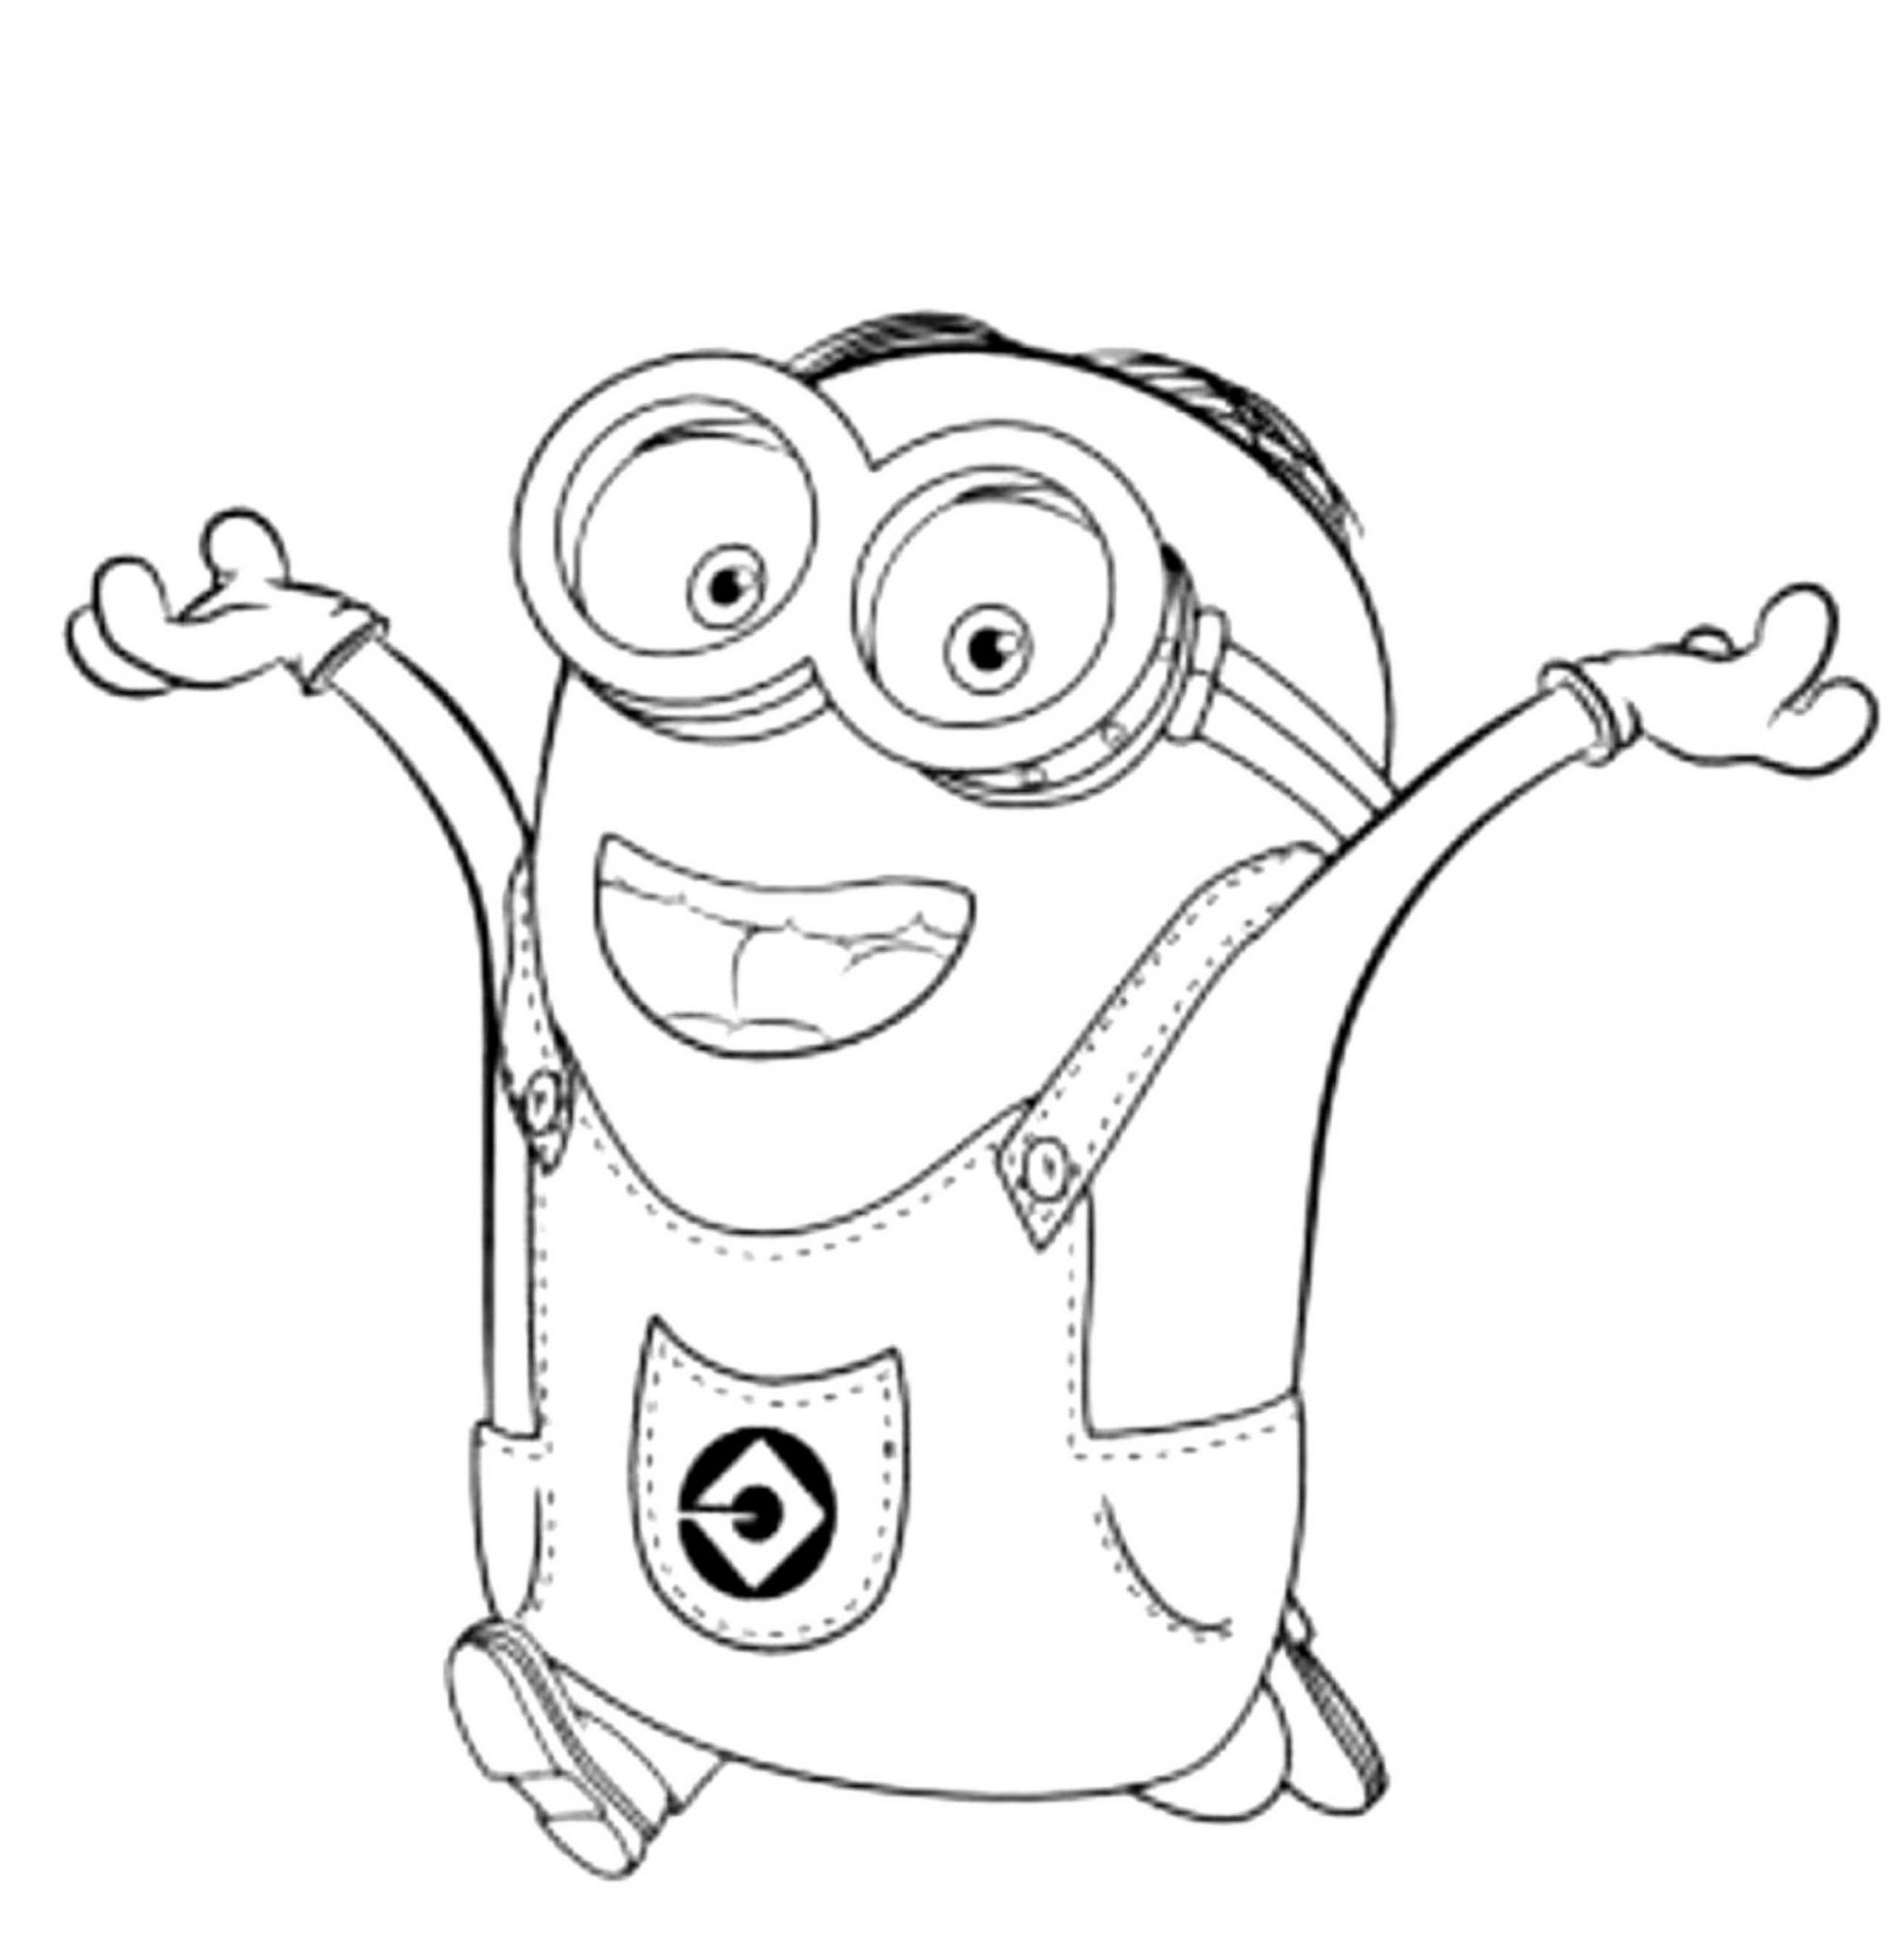 girl minion coloring pages